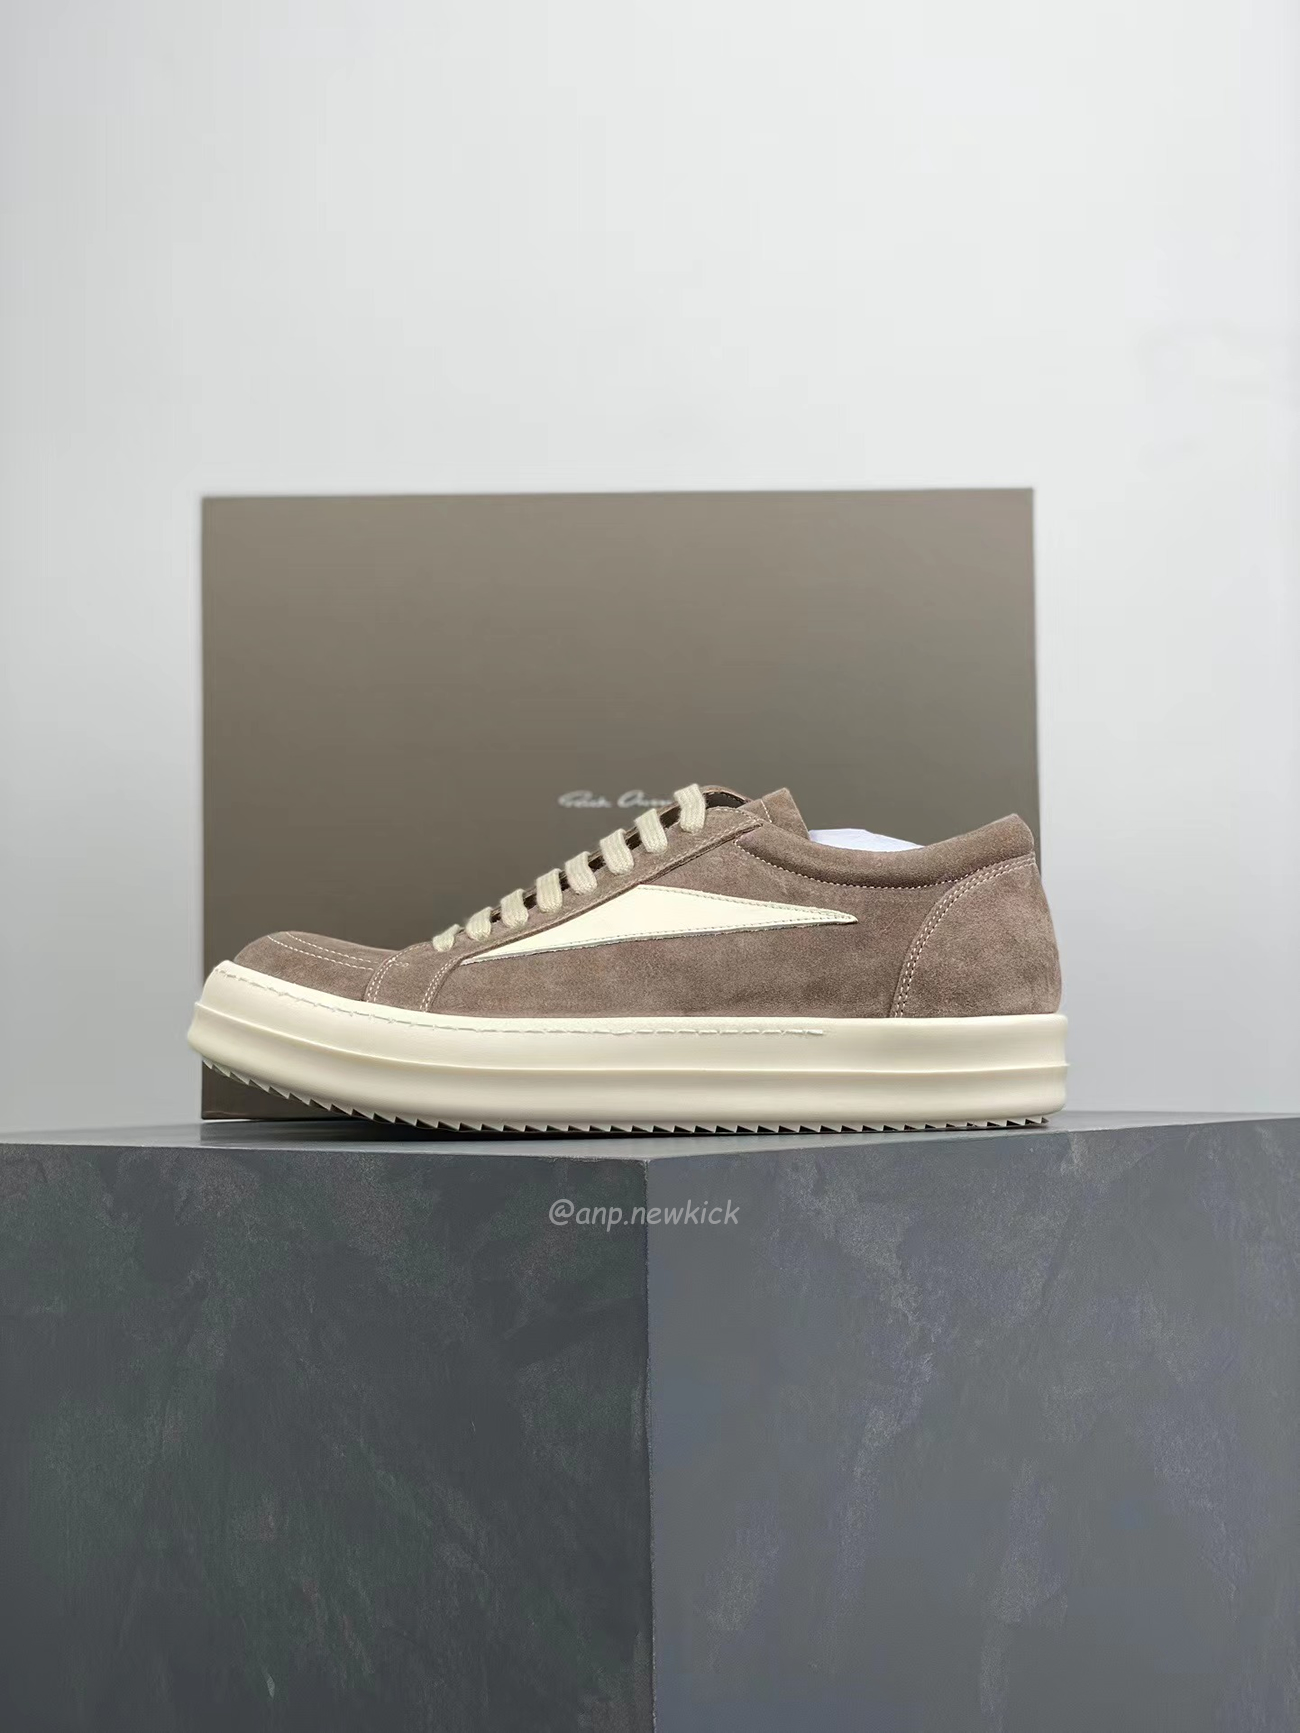 Rick Owens Leather Low Top Vintage Sneakers Suede Canvas Black Taupe Grey Faded Pnk Pearl Milk Dark Dust (7) - newkick.org